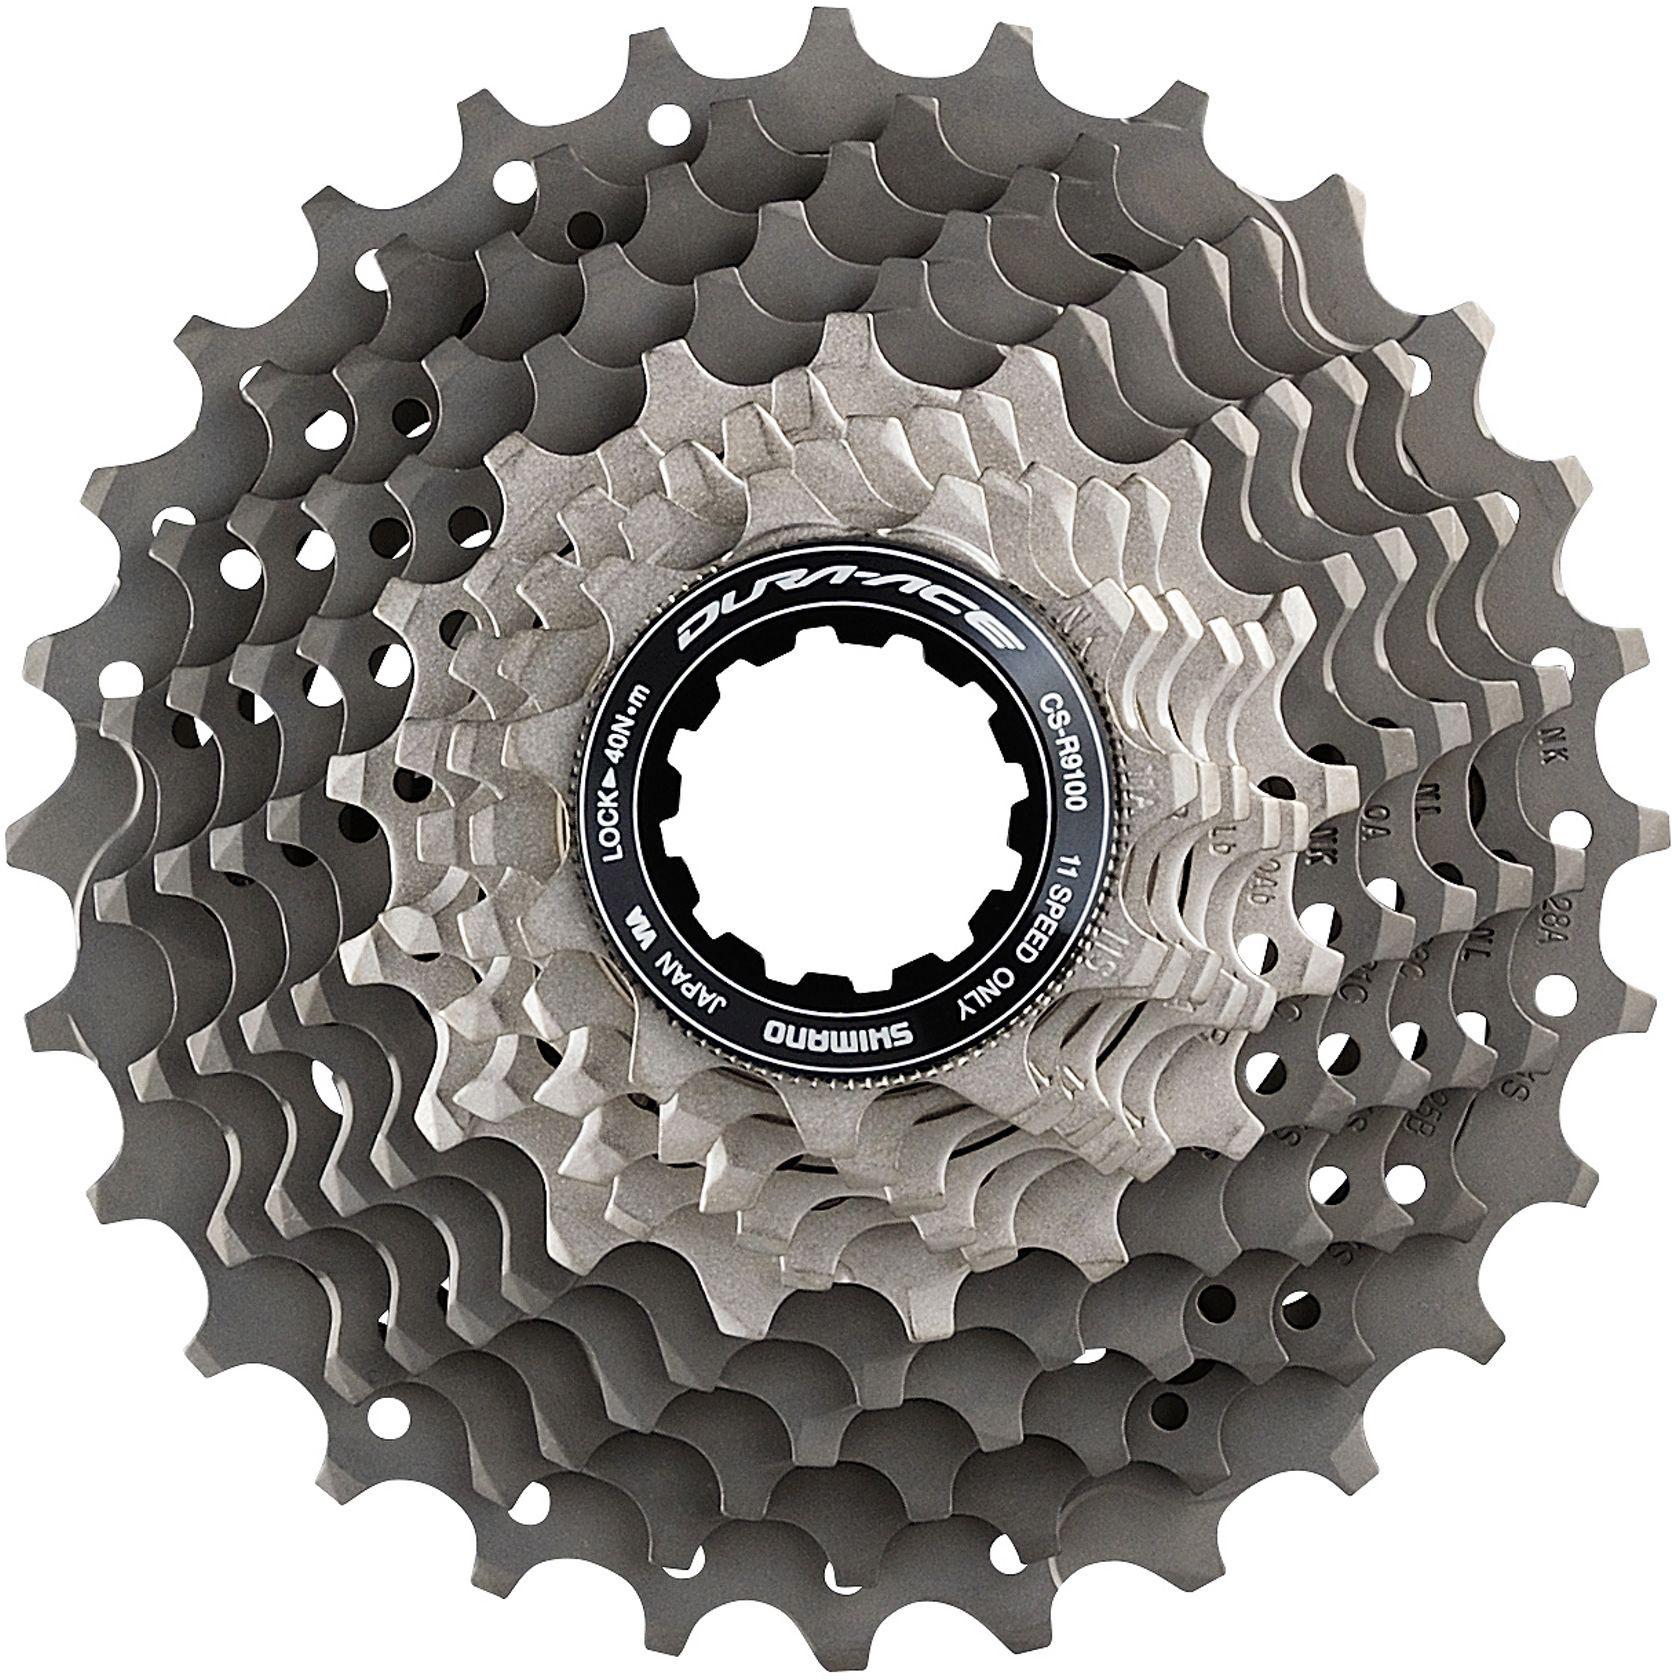 Shimano Dura Ace R9100 11 Speed Cassette - Silver